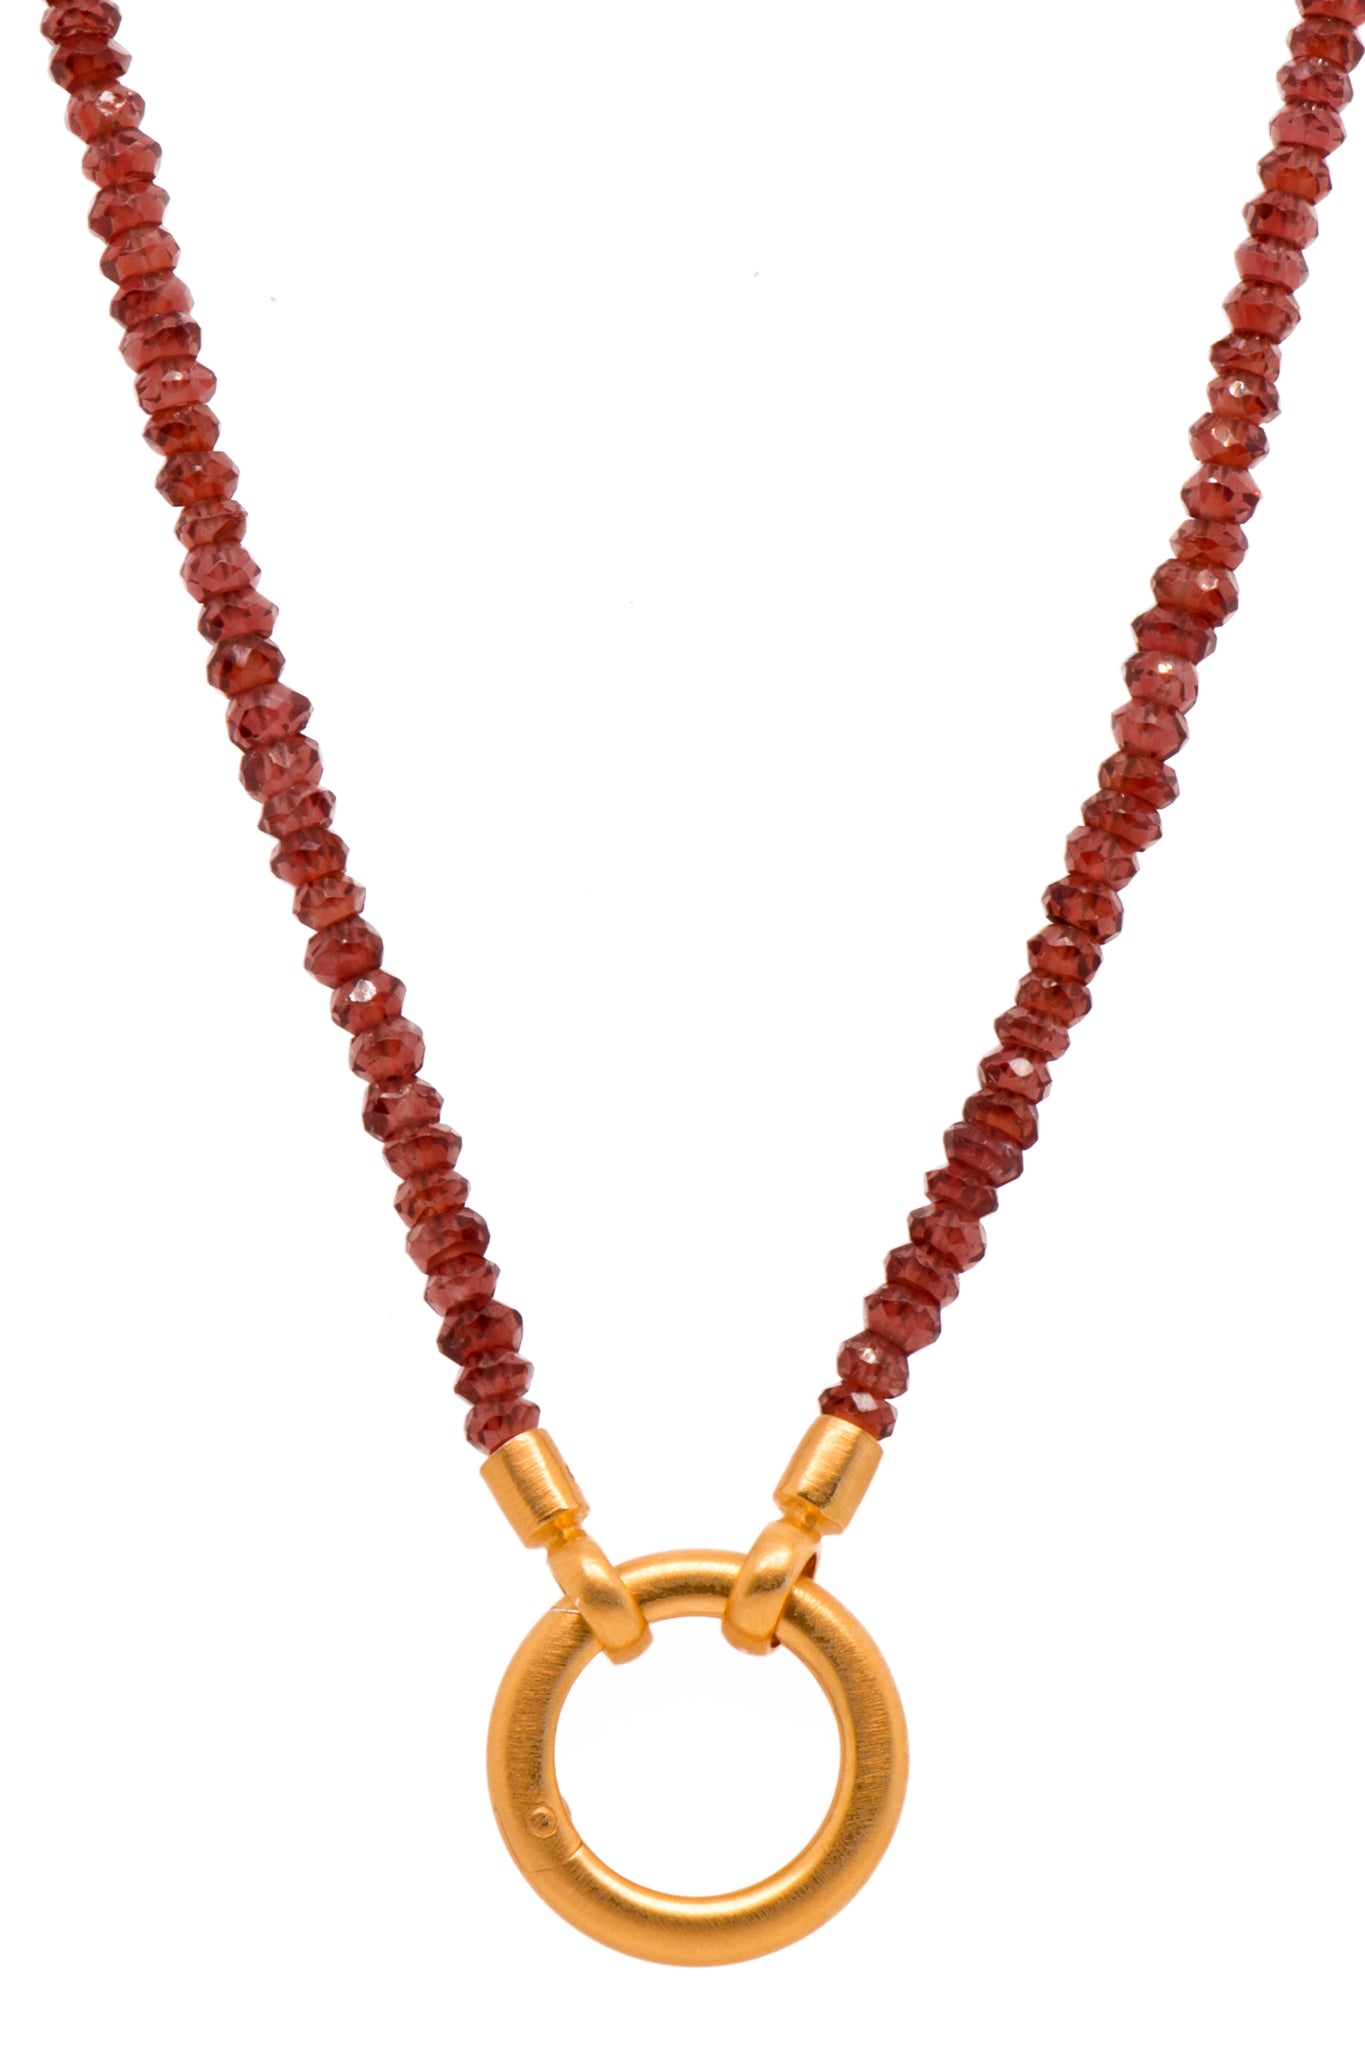 Garnet Necklace 3mm With Ring Clasp 24K Fair Trade Gold Vermeil 31.5"